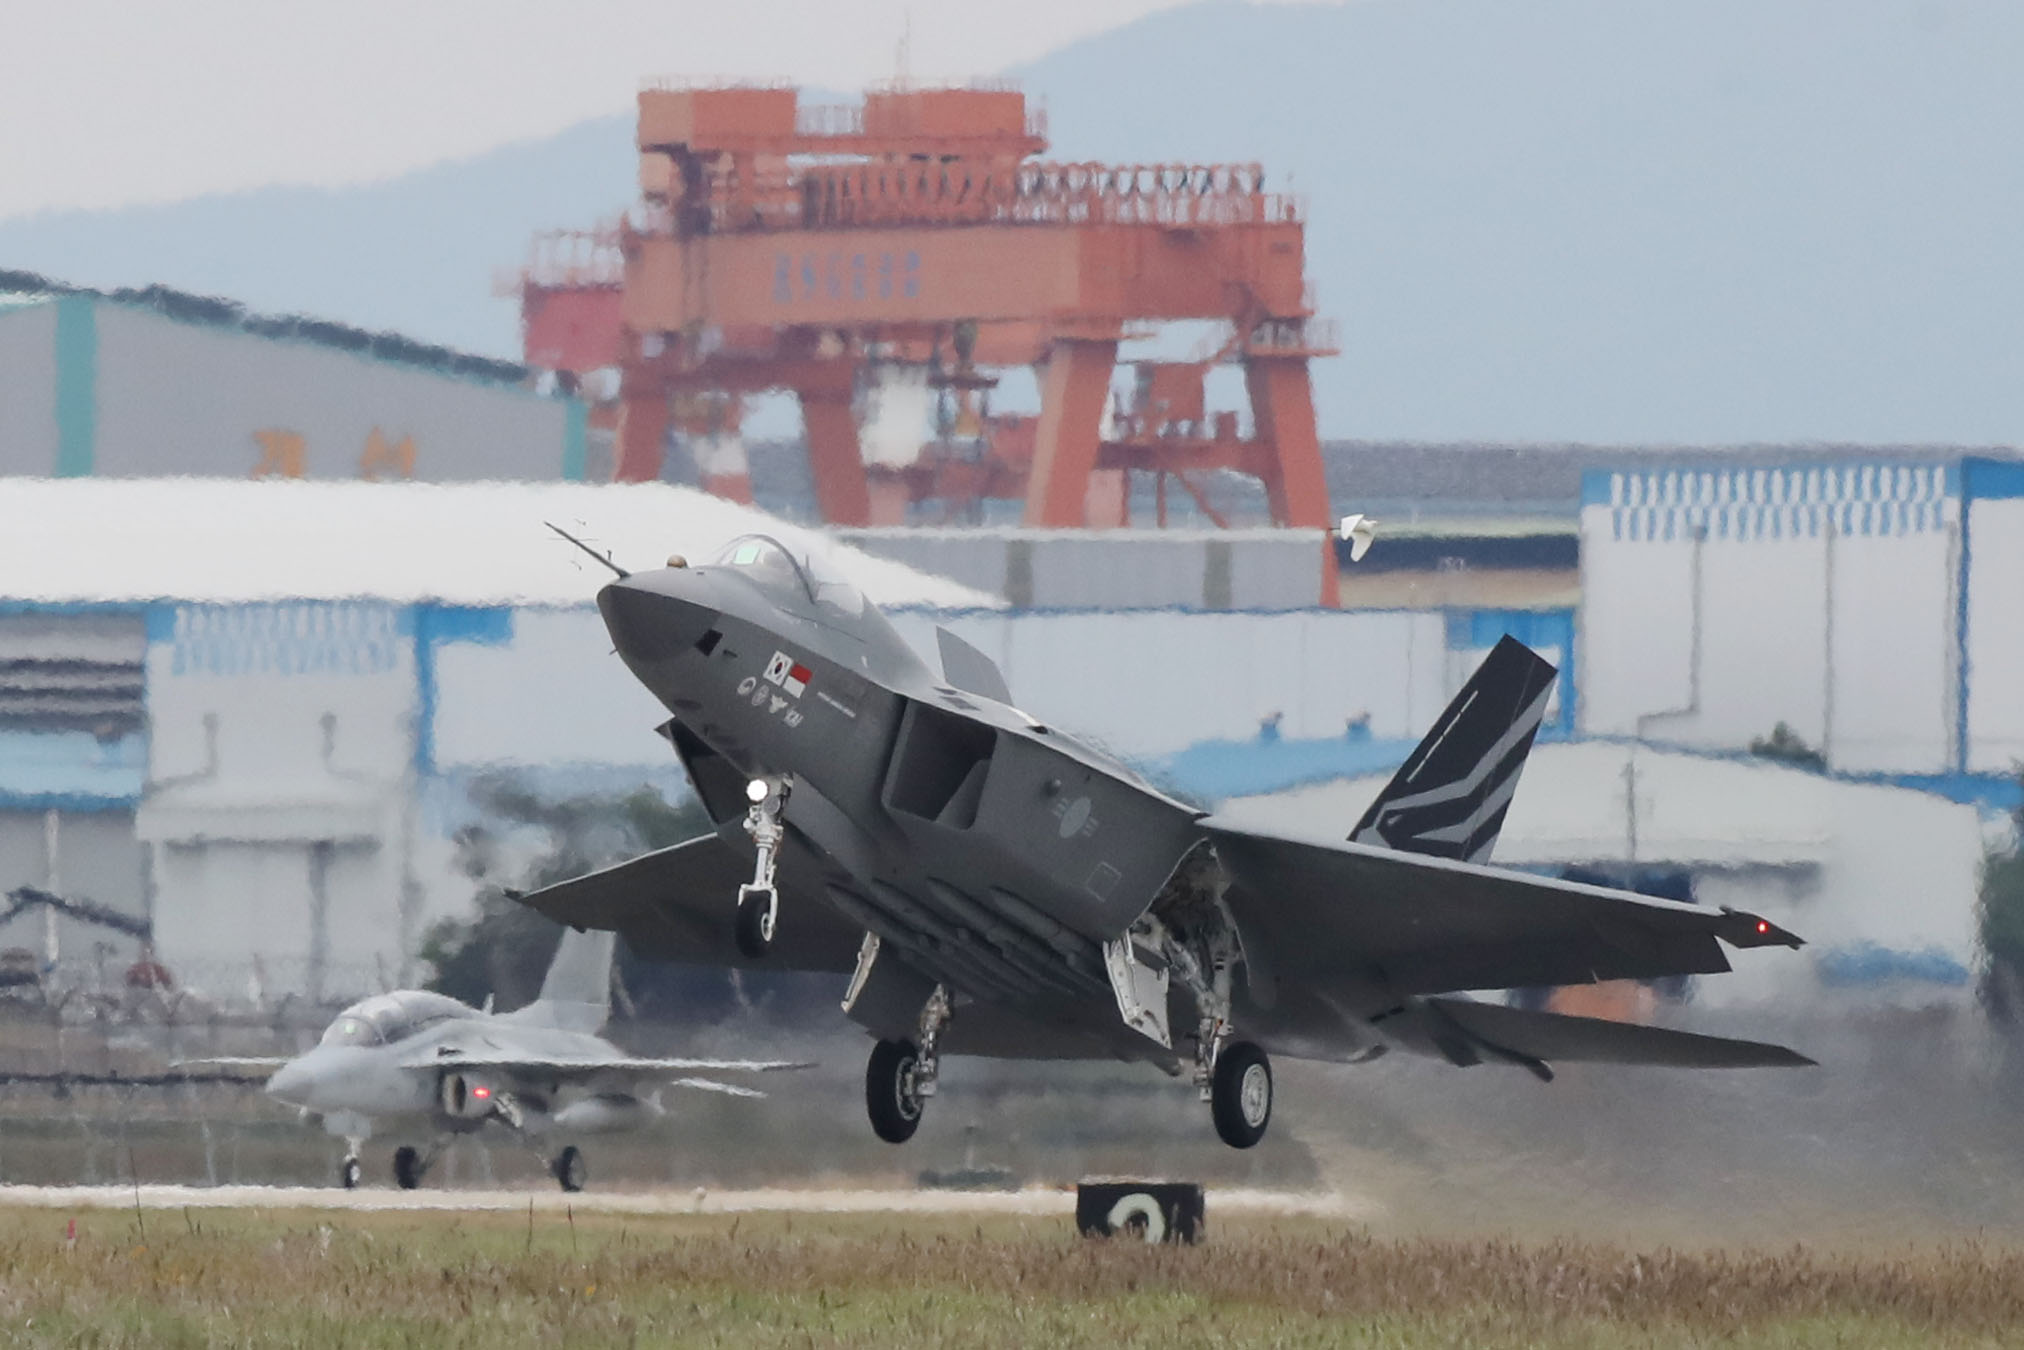 The domestically developed fighter jet KF-21 Boramae on Sept. 28 takes off from the runway of the 3rd Flying Training Wing at Sacheon Air Base in Sacheon, Gyeongsangnam-do Province on Sept. 28.